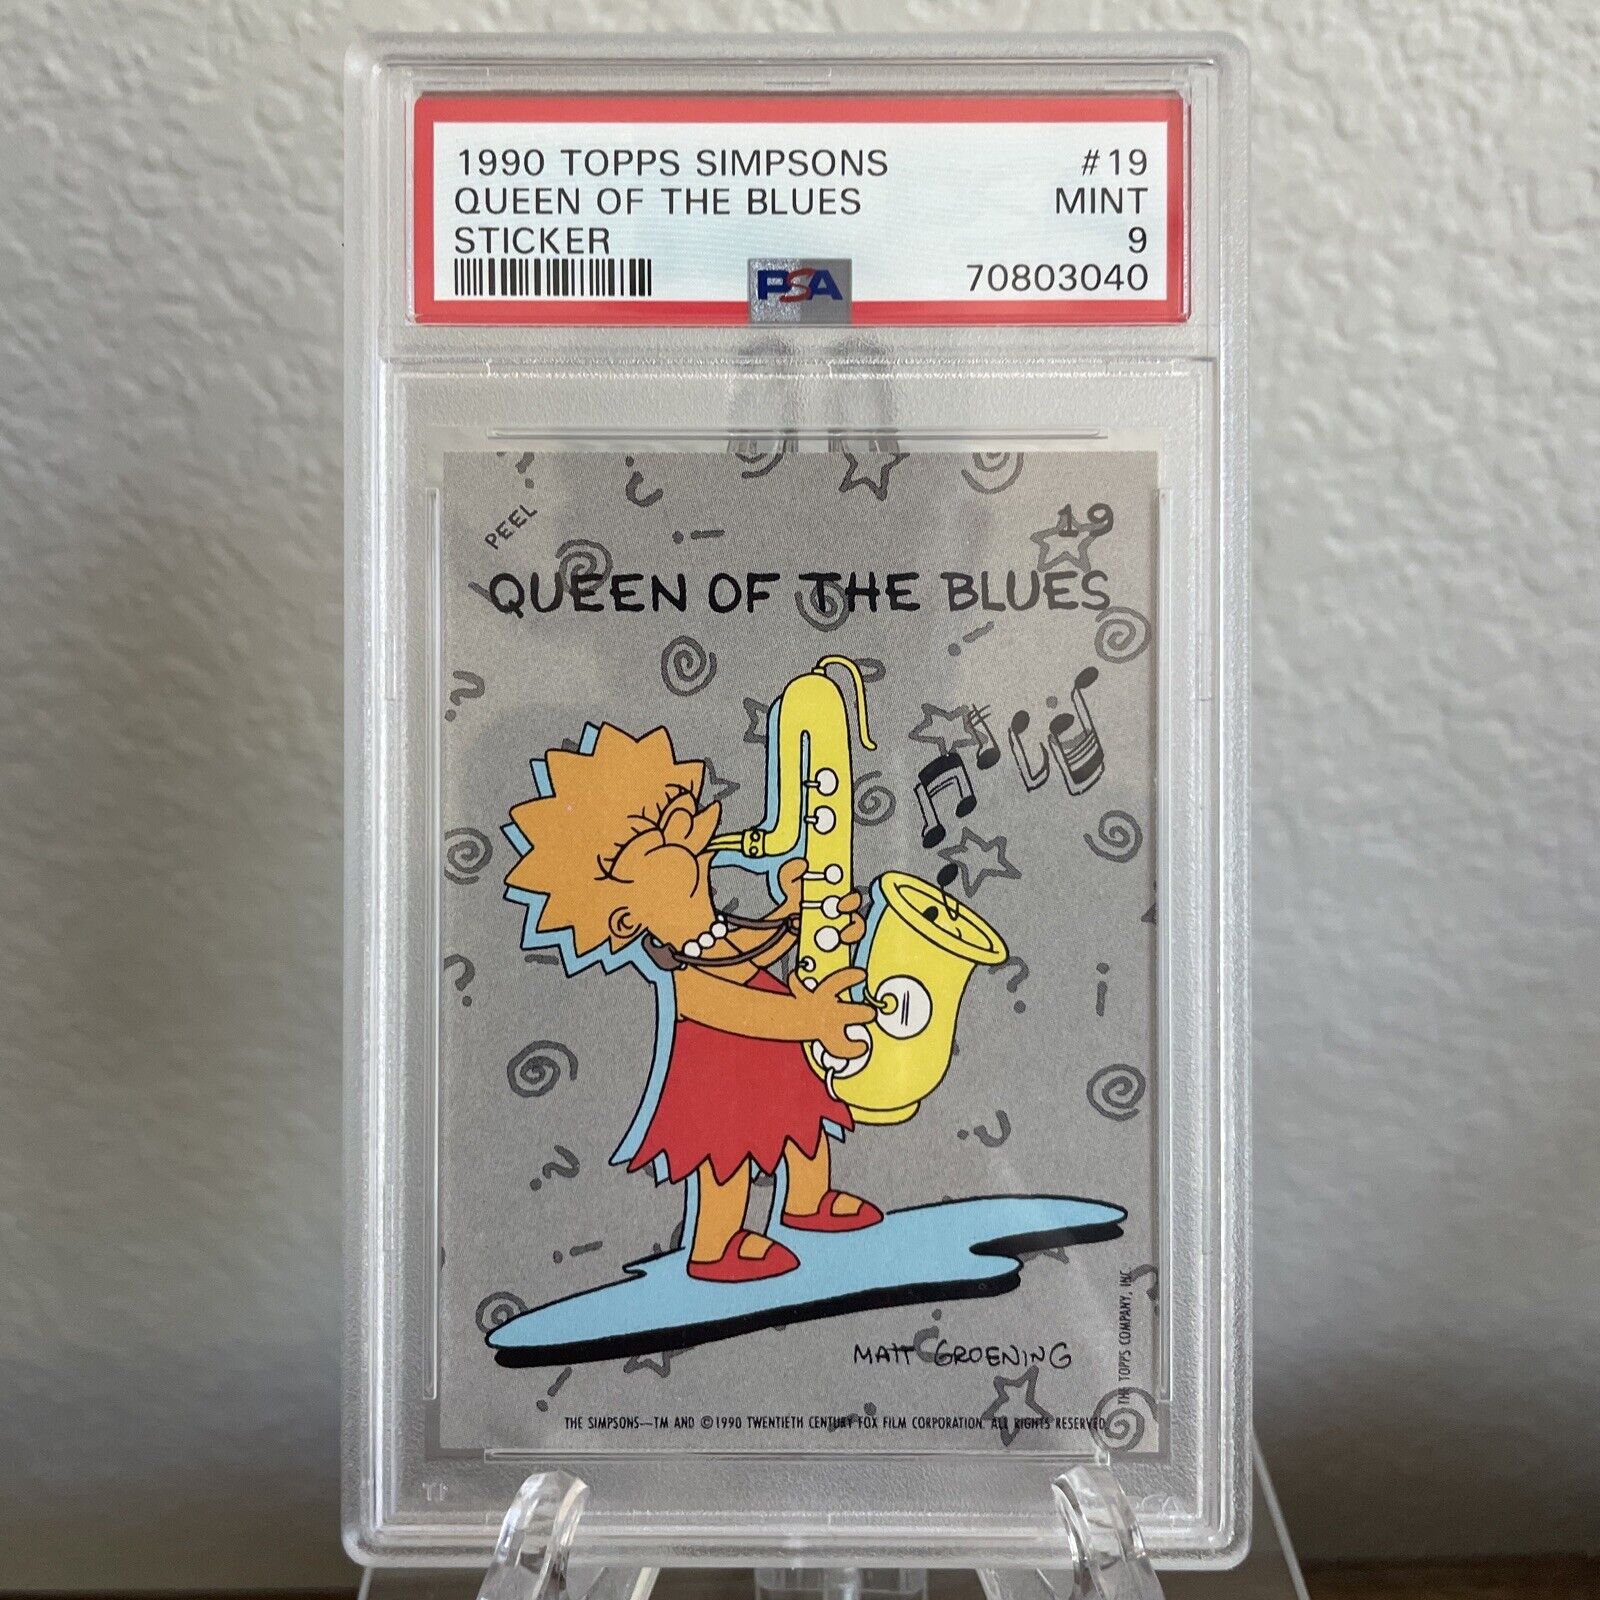 1990 Topps Simpsons Stickers LISA SIMPSON QUEEN OF THE BLUES #19 | PSA 9 Mint